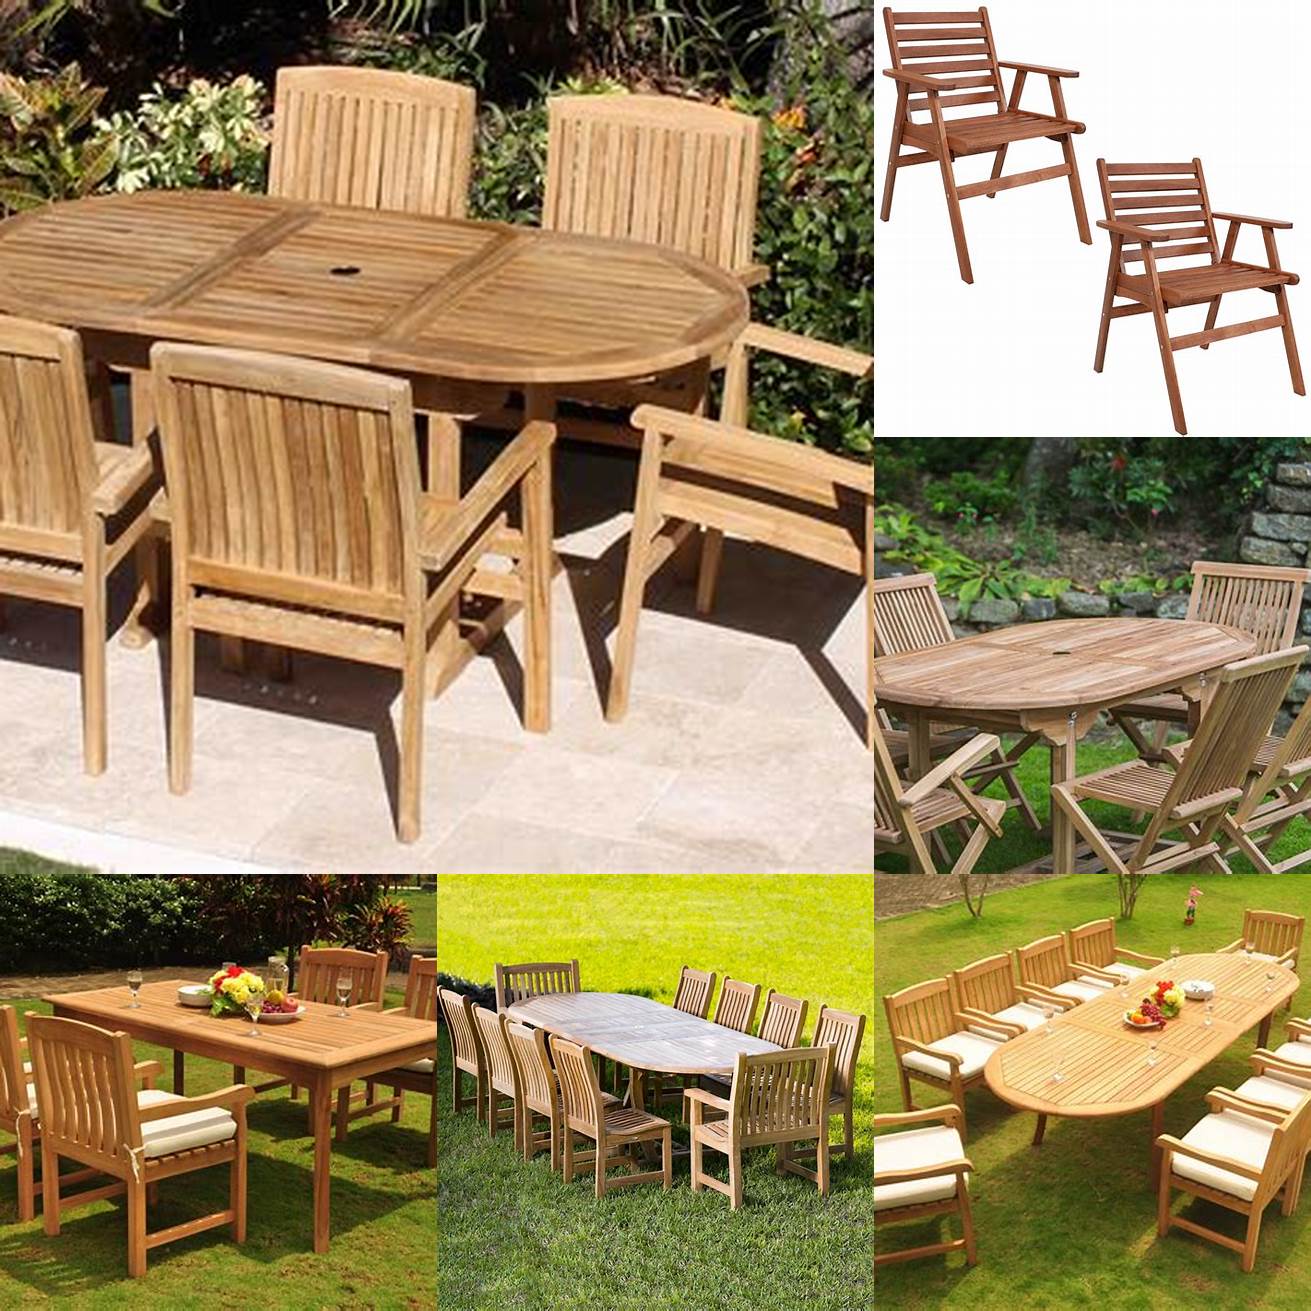 A teak garden furniture set with an oiled finish